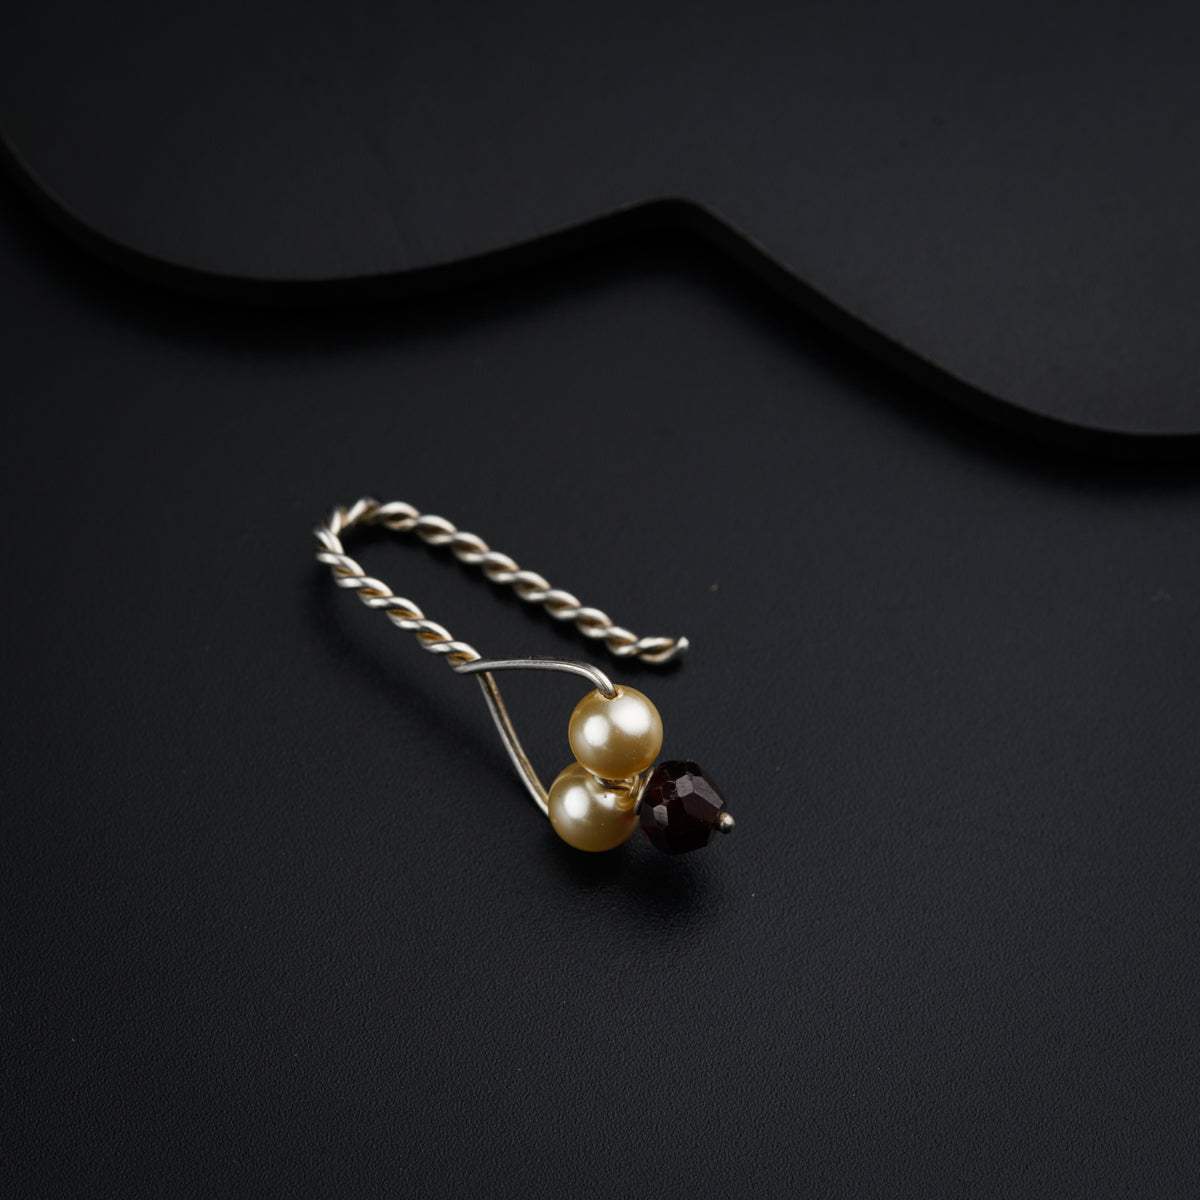 a pair of pearls and a chain on a black surface